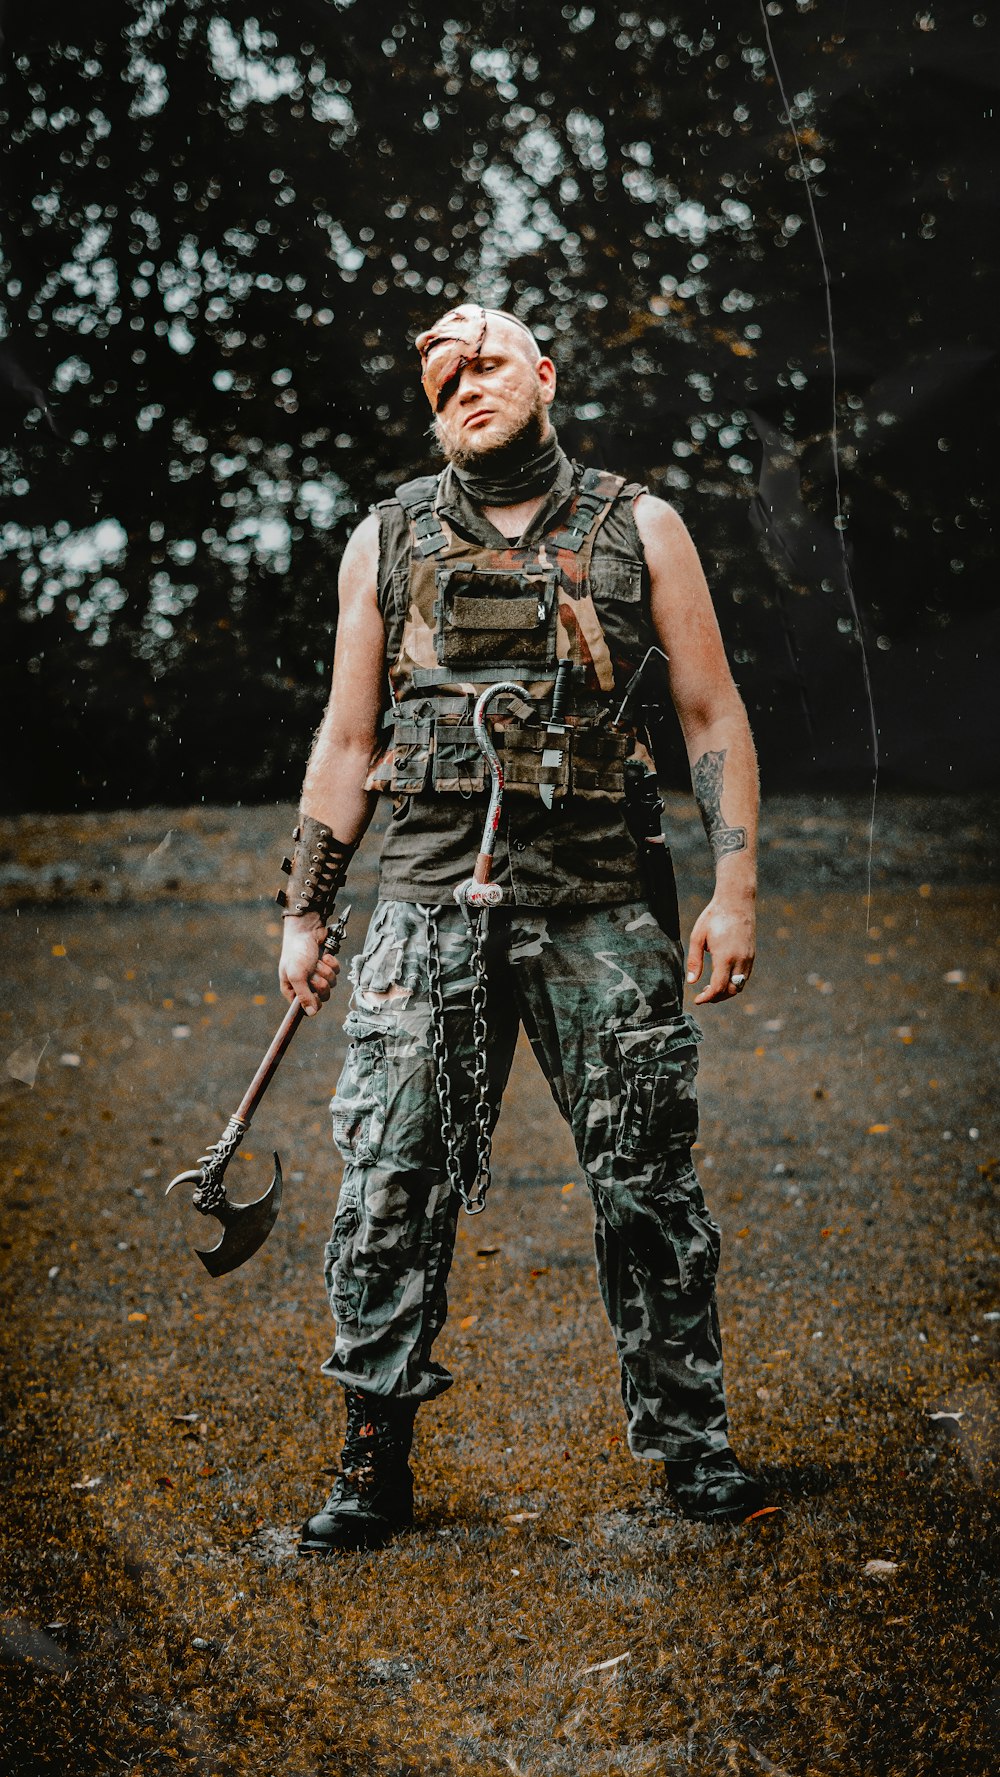 a man in a camouflage outfit holding a wrench